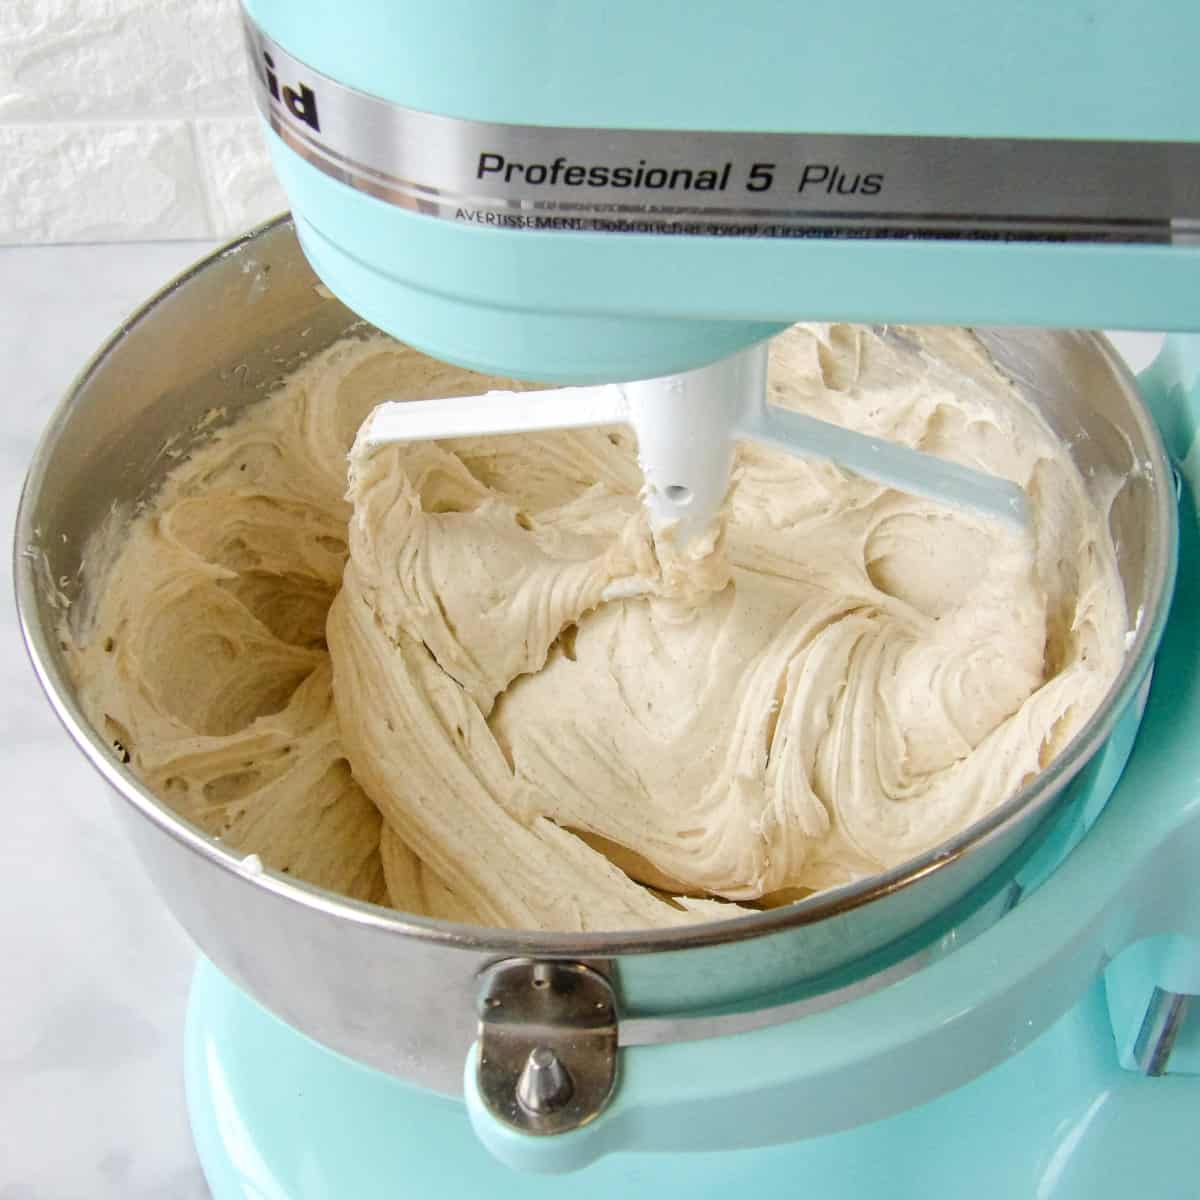 Mixing cinnamon cream cheese frosting in a blue electric stand mixer.